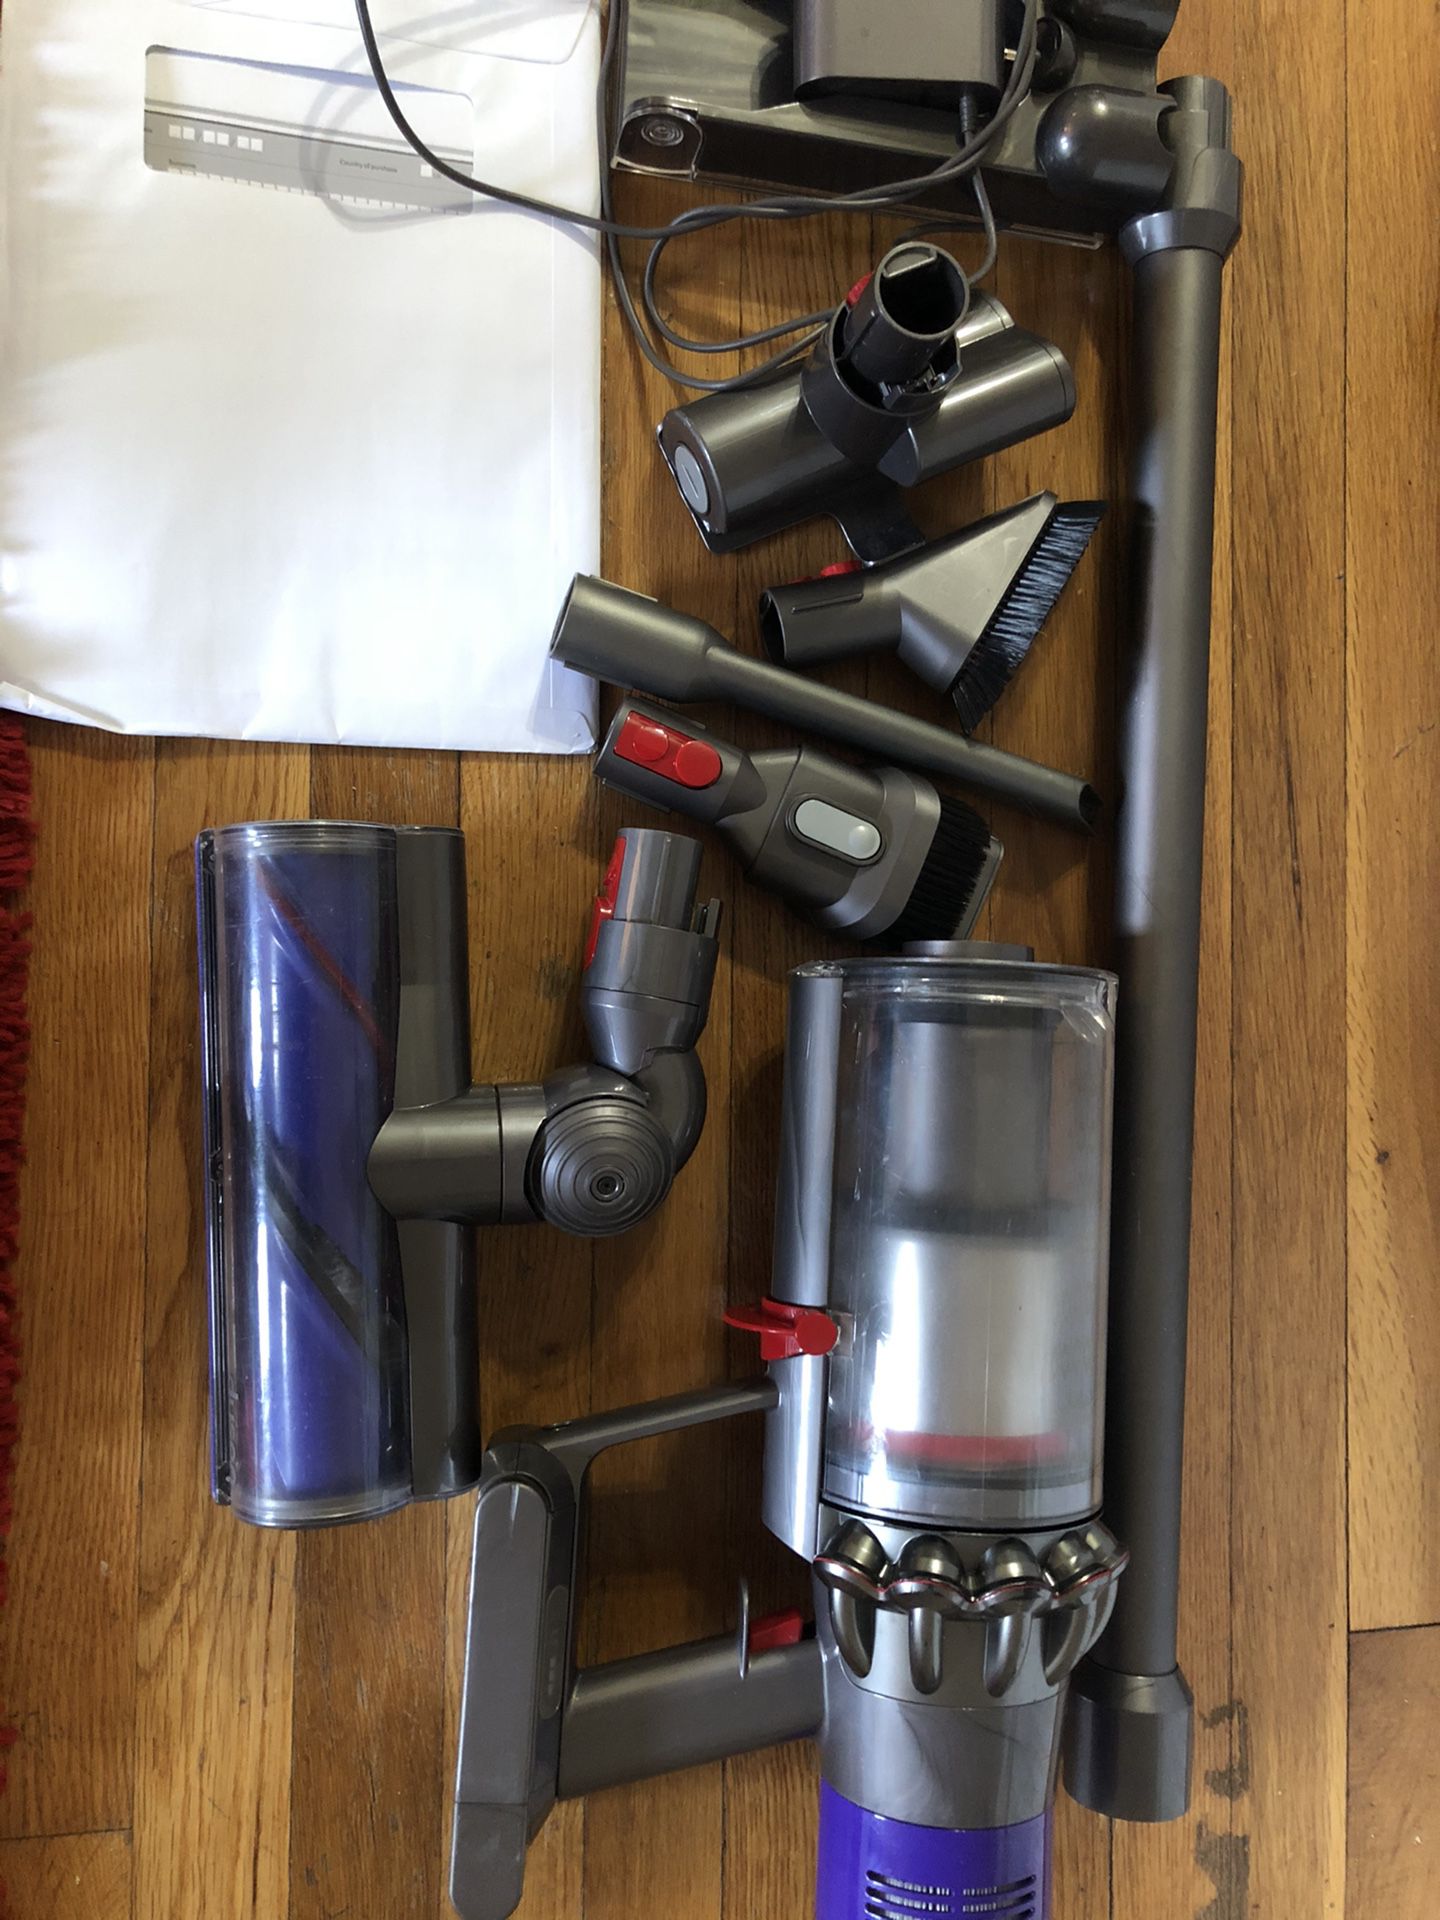 Dyson Cyclone V10 Animal, Absolute , total clean cordless vaccum   Comes with  Charger,  Crevice tool  Combination tool  Animal tool  HEPA filter  Mai